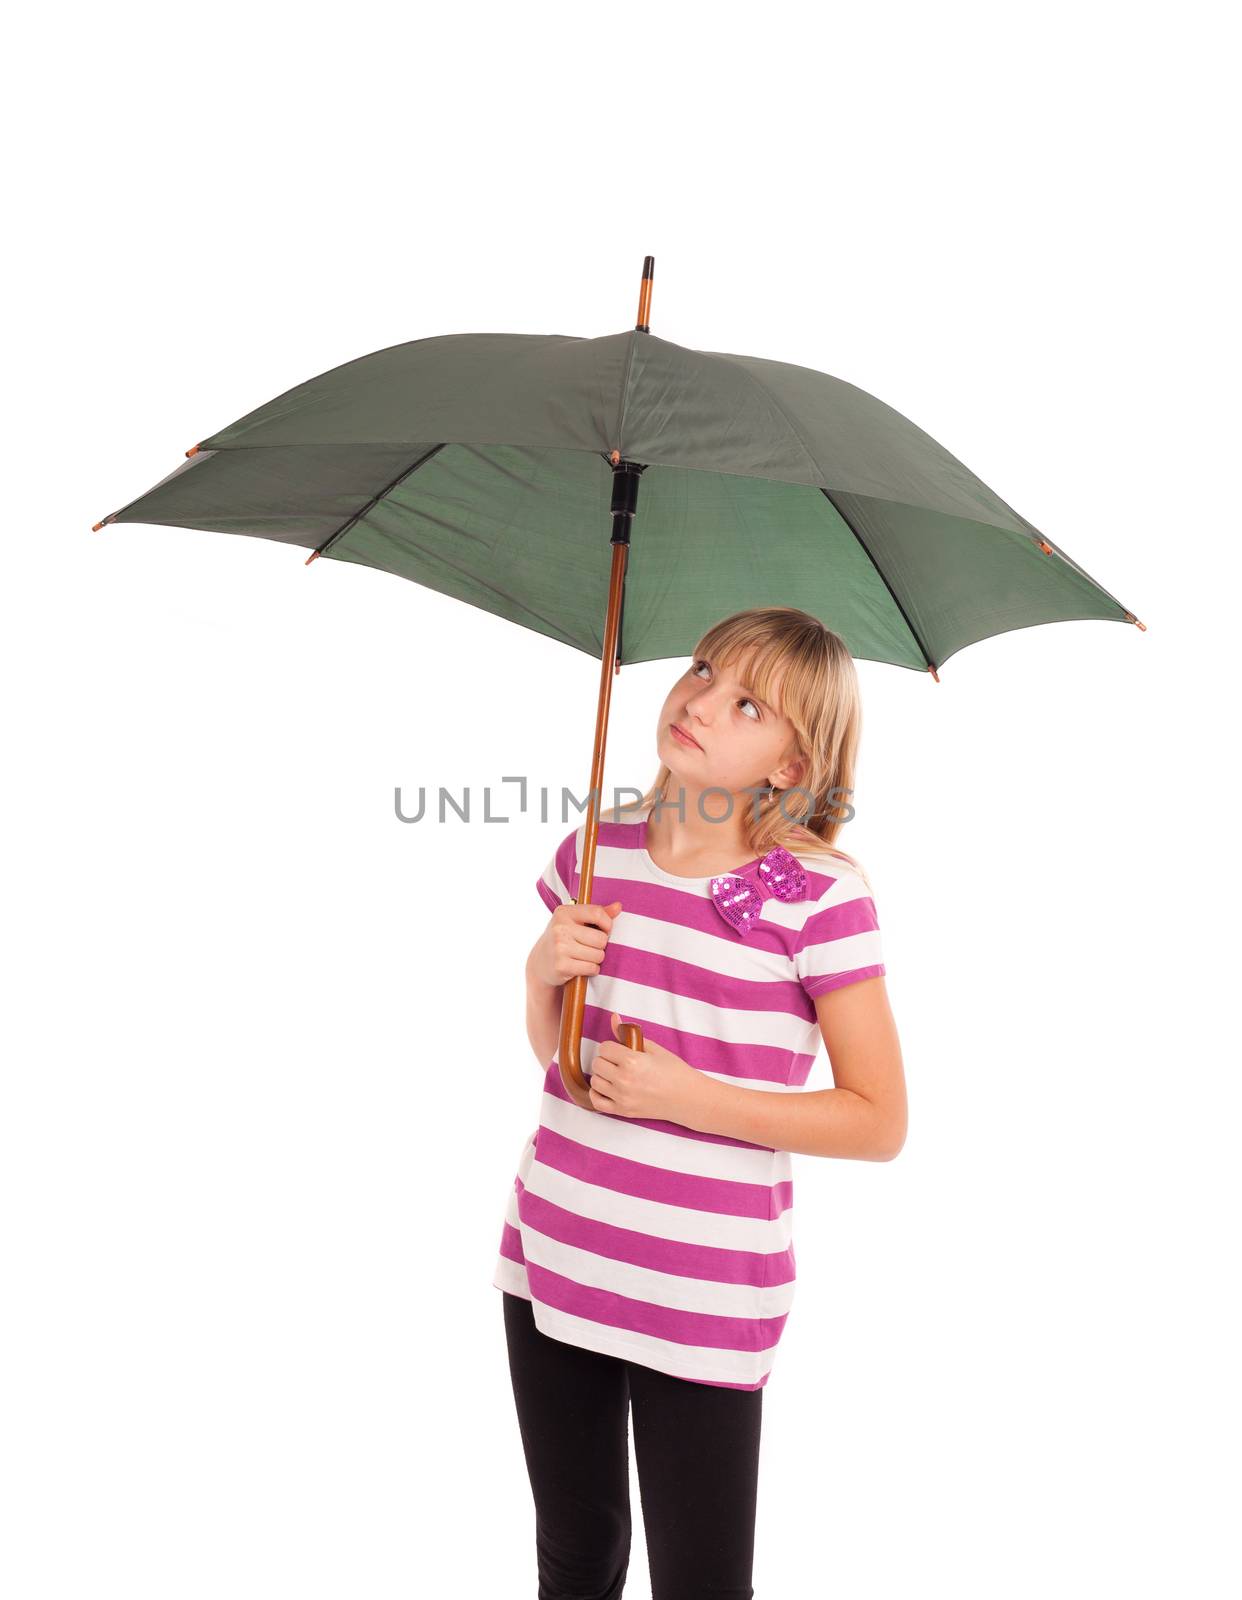 Girl with umbrella in front of a white background.